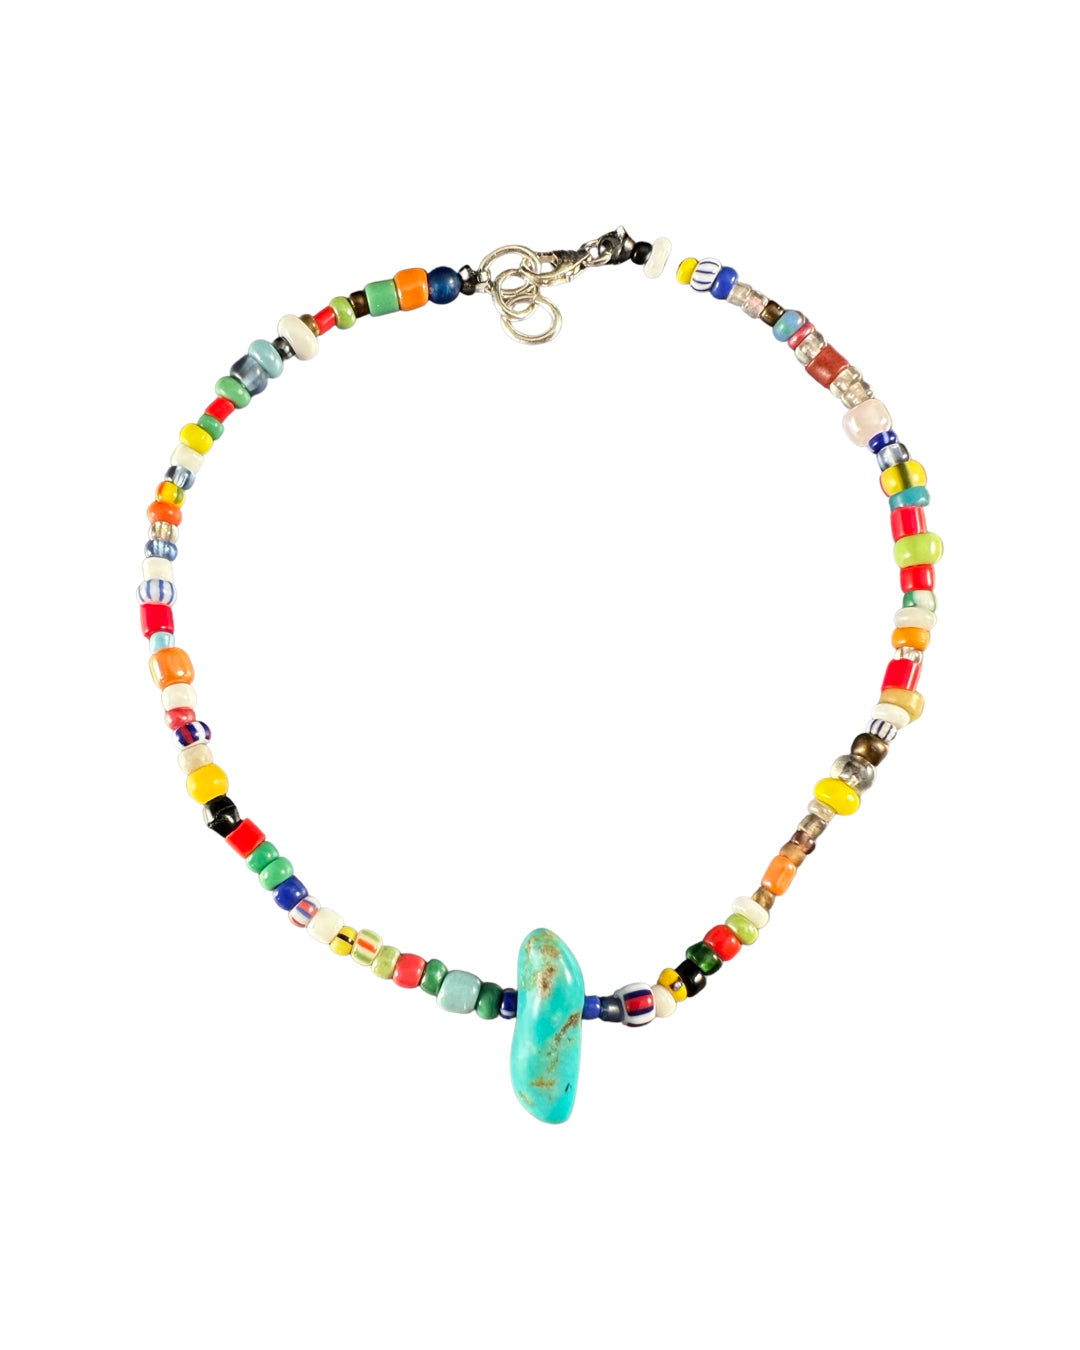 African Glass Bead Christmas Bead Anklet, Bracelet, Necklace